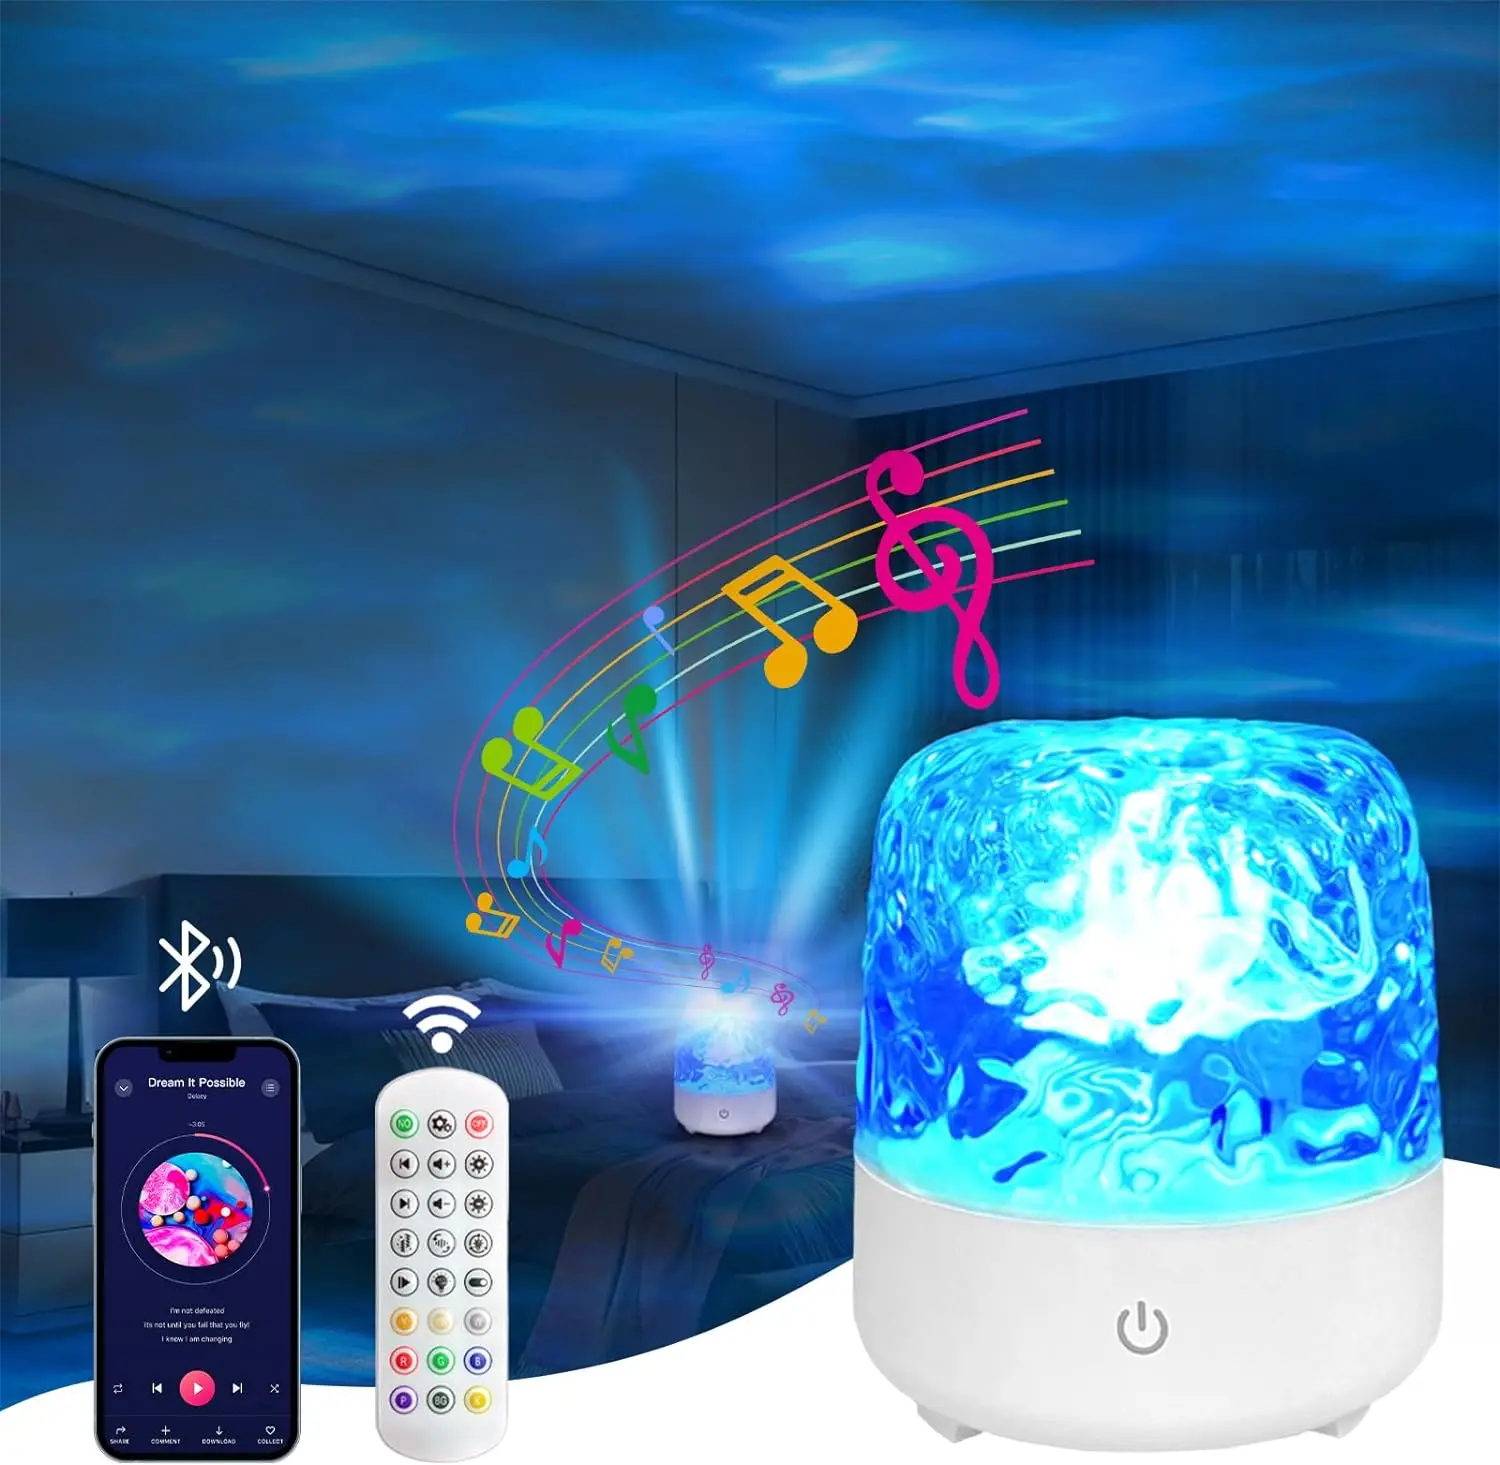 

Dynamic LED Aurora Projector Crystal Lamp with Bluetooth Speaker Night Light Water Ripple Projector Bedroom Room Atmosphere Lamp